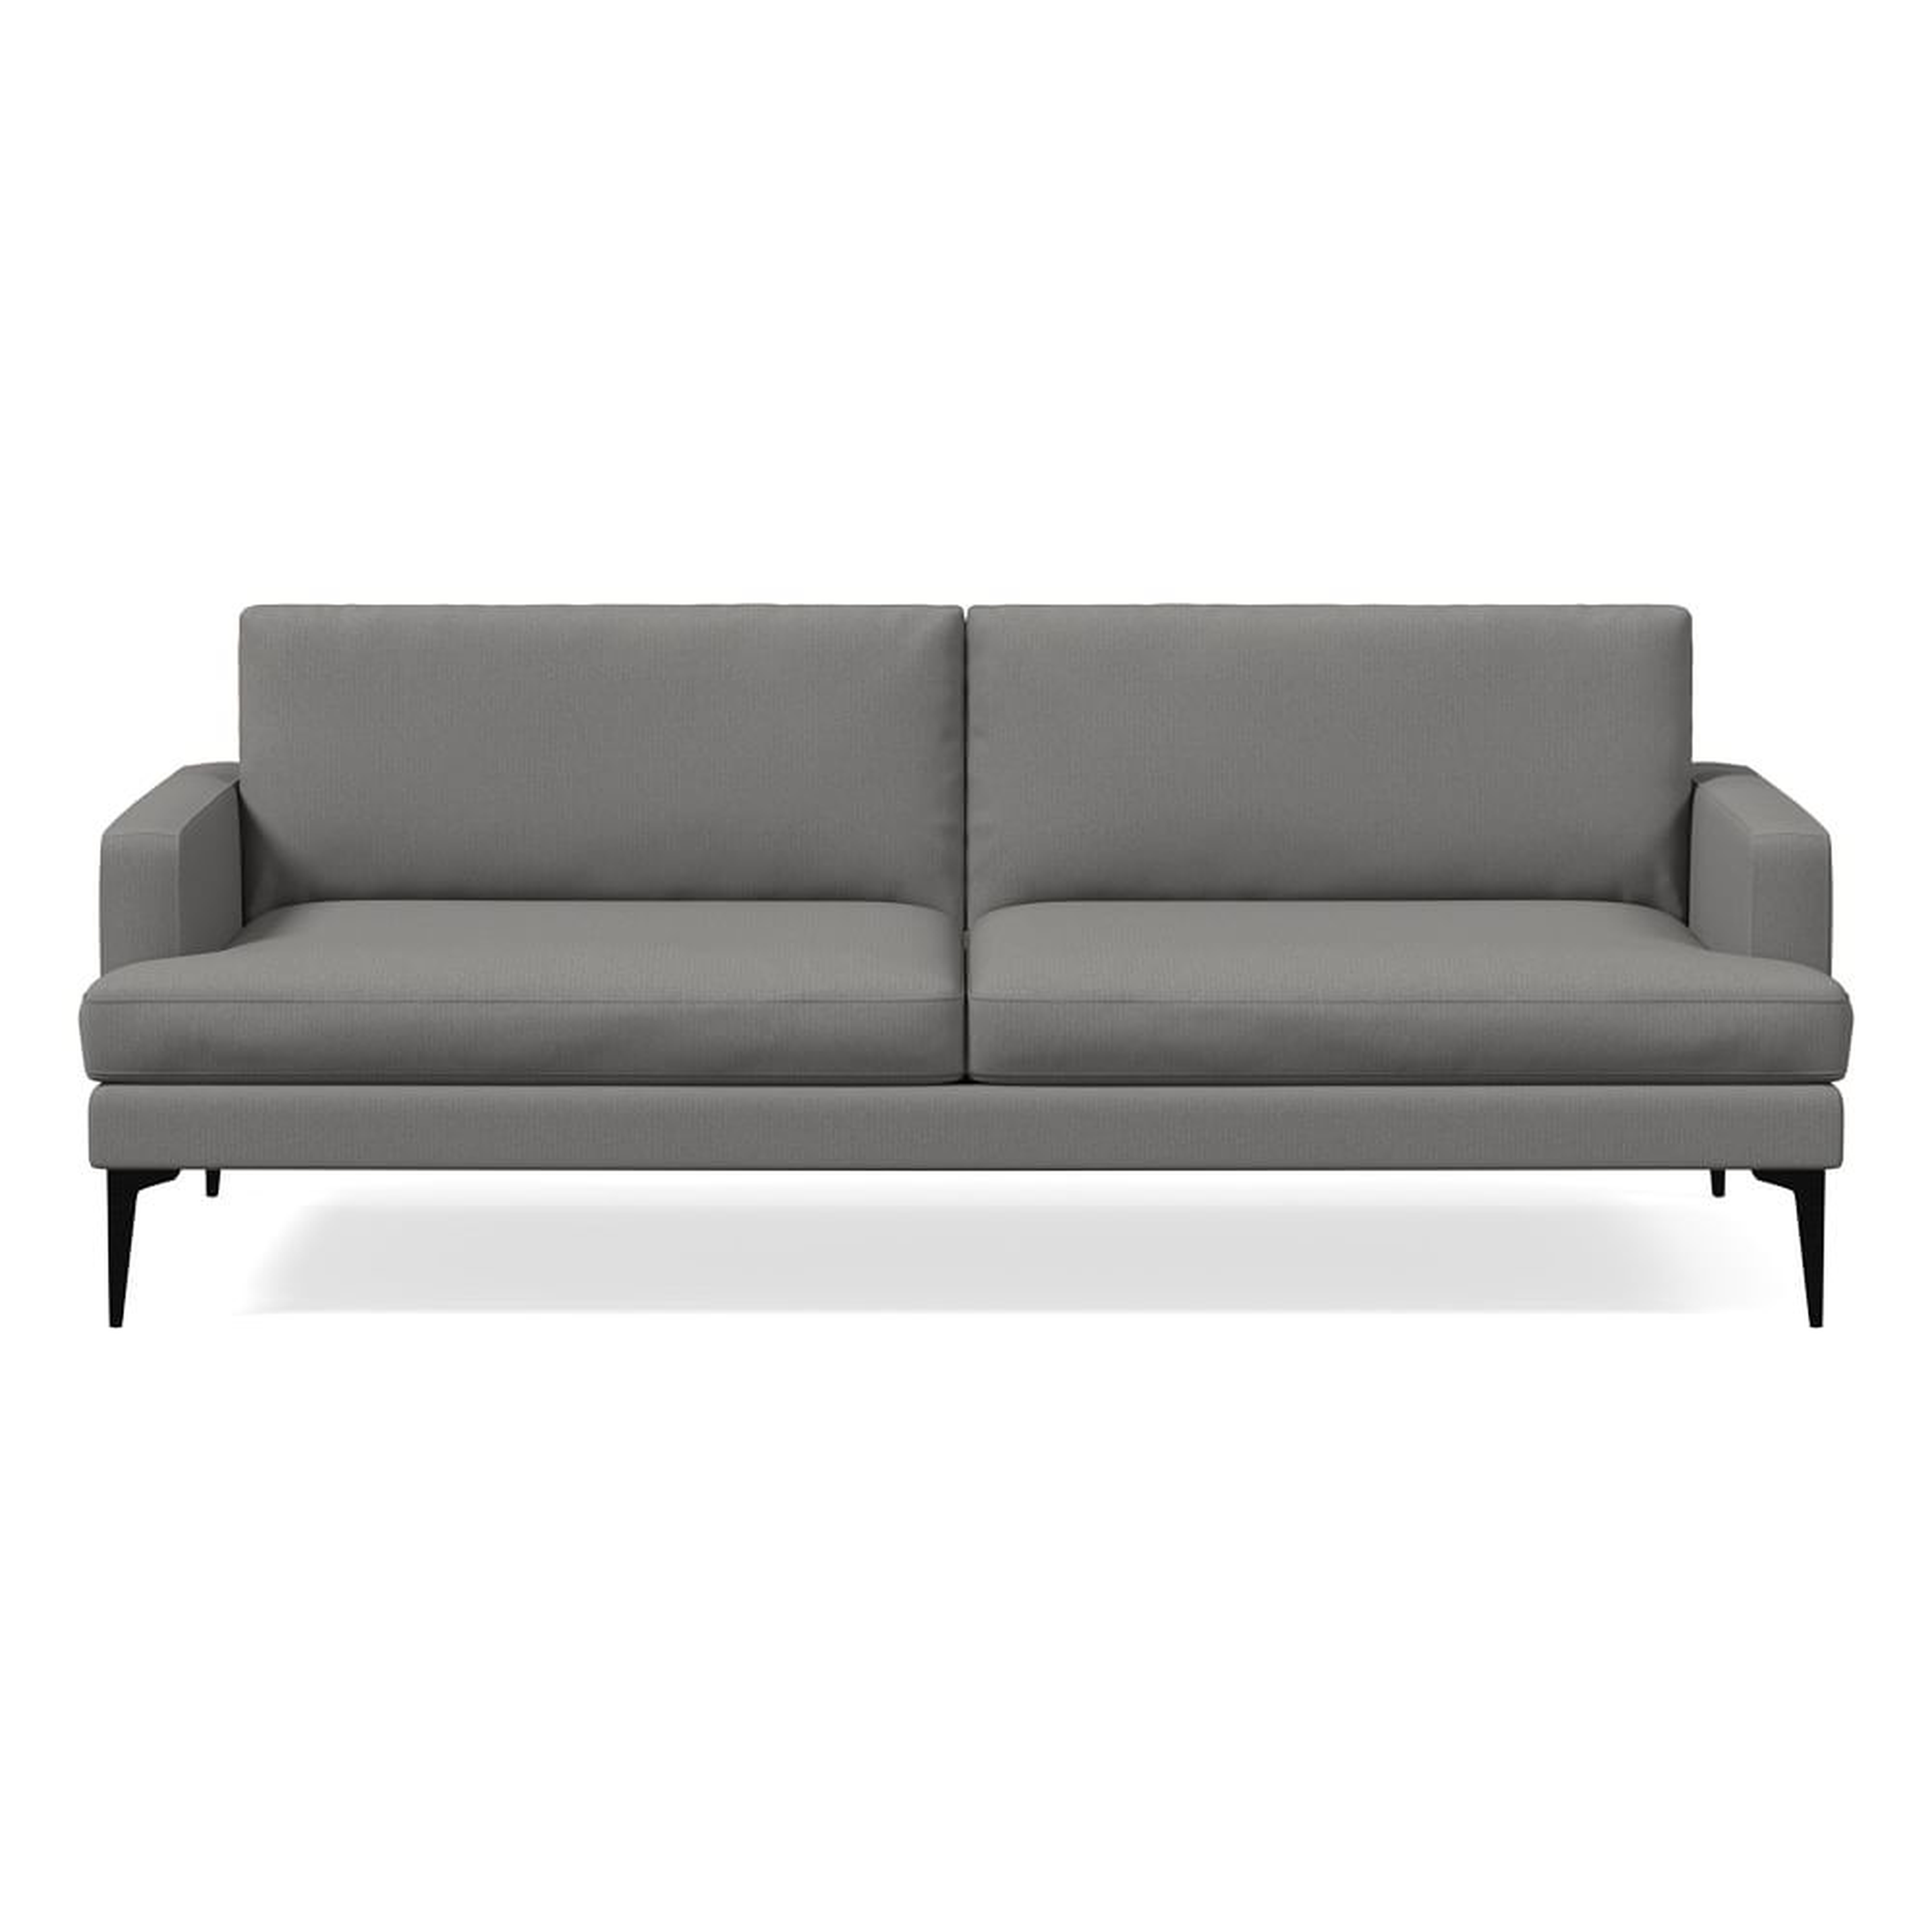 Andes 84" Futon, Performance Washed Canvas, Storm Gray, Dark Pewter - West Elm